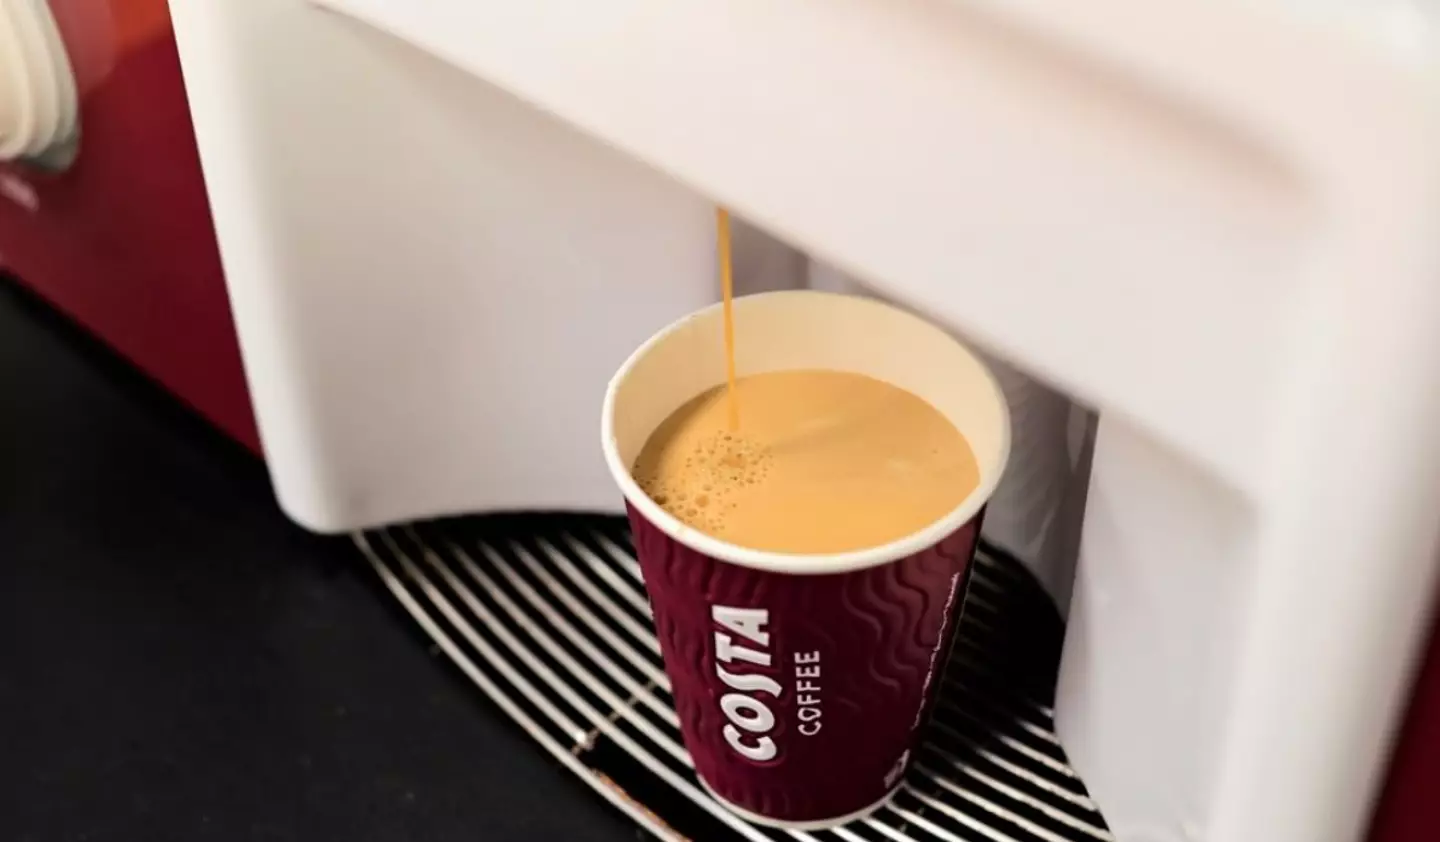 Costa has since taken the ad down from its social media pages (